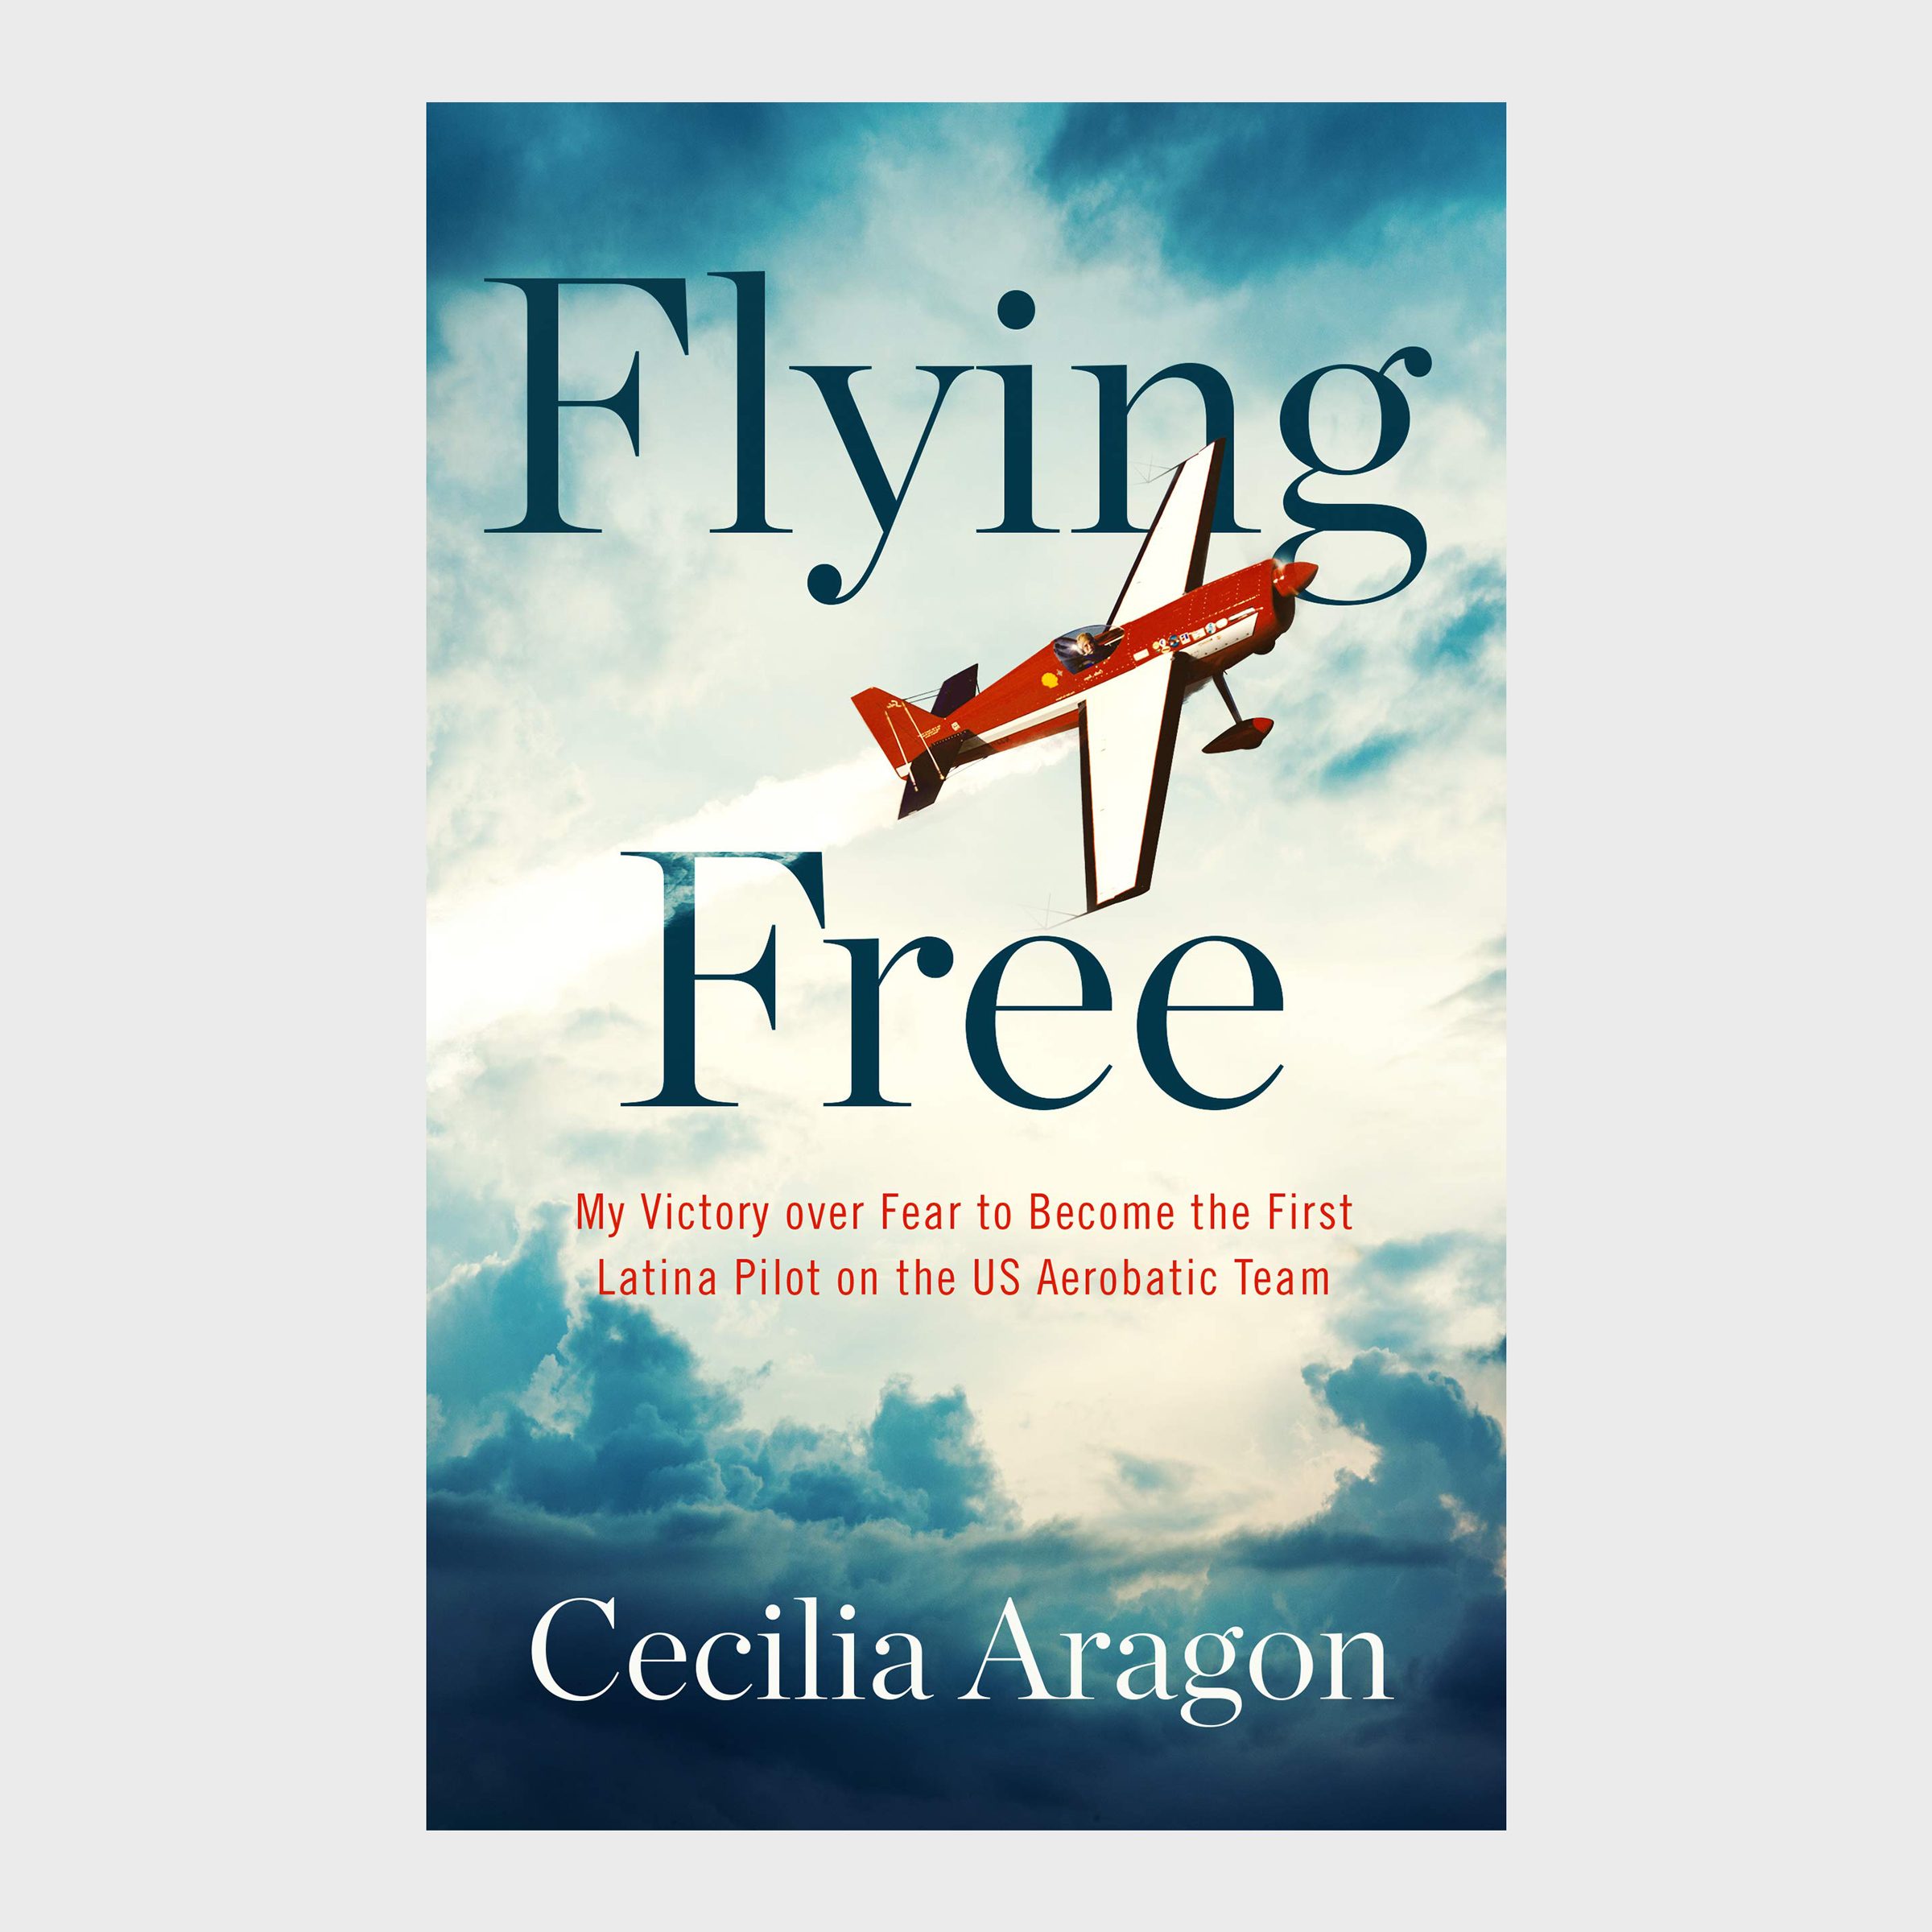 Flying Free: My Victory over Fear to Become the First Latina Pilot on the US Aerobatic Team by Cecilia Aragon